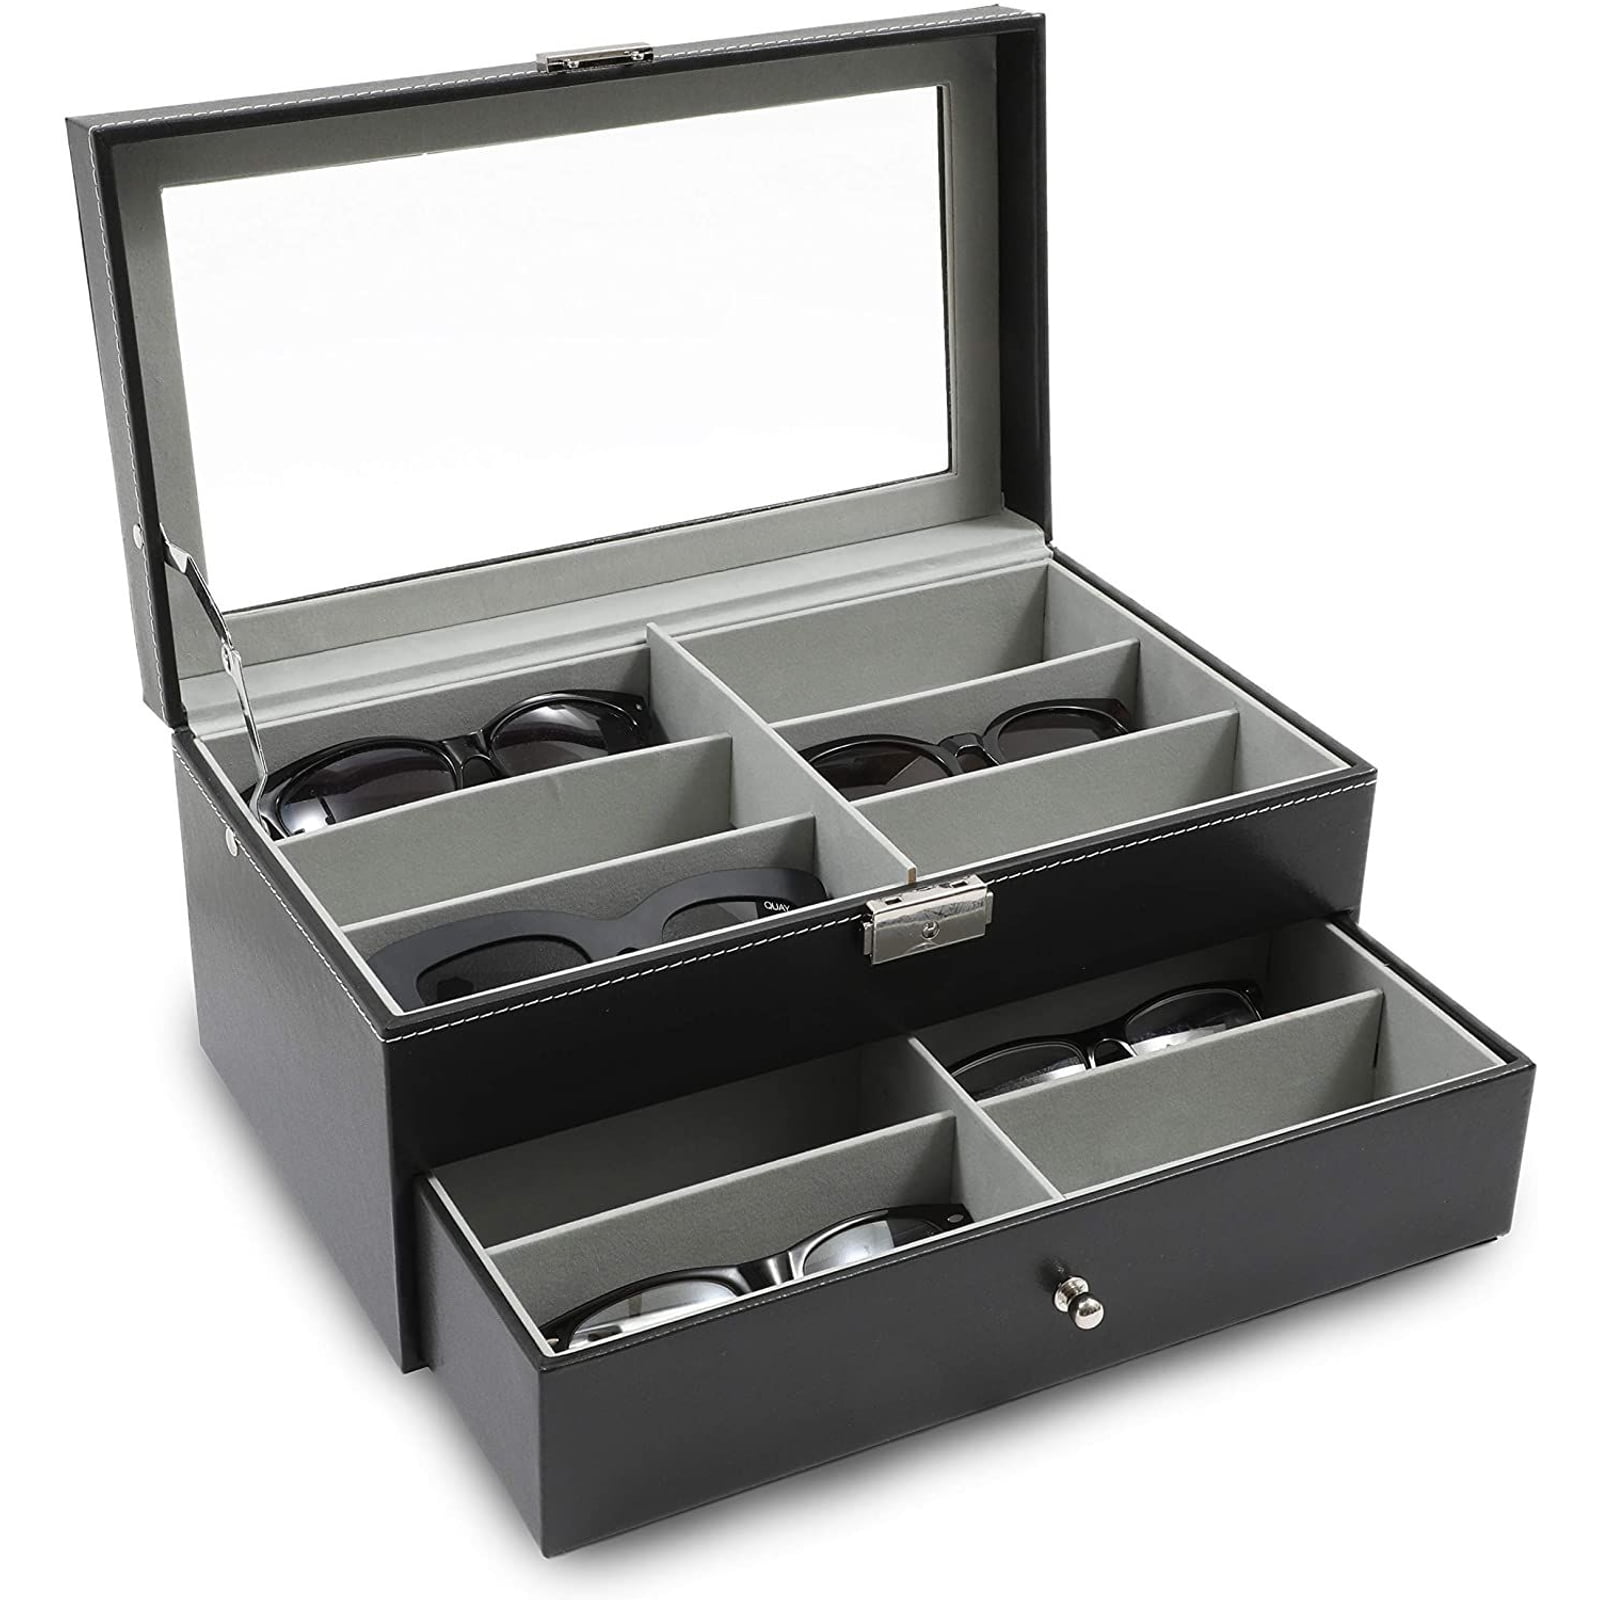 Deluxe Black 12 Compartment Eyewear & Sunglasses Display Case w/ Glass Lid 1 Drawer & Leatherette Trim 